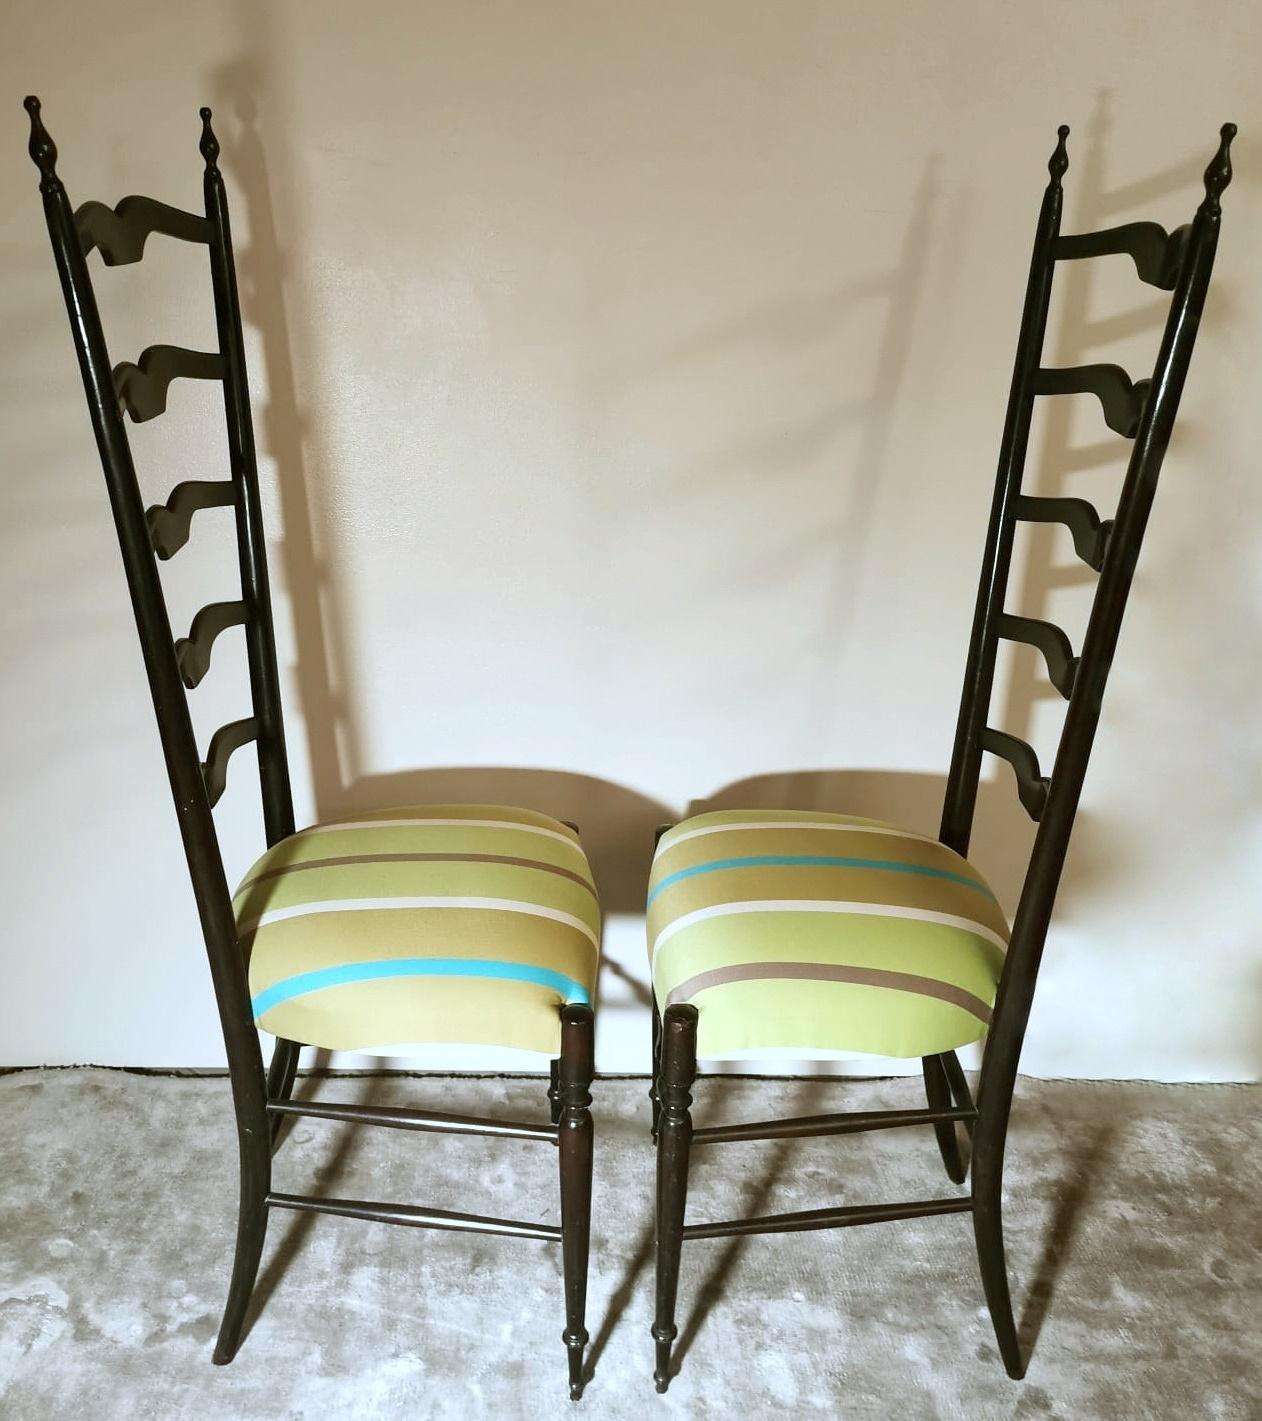 Paolo Buffa Style Pair of Chiavari Chairs in Italian Wood with High Backrest In Good Condition For Sale In Prato, Tuscany